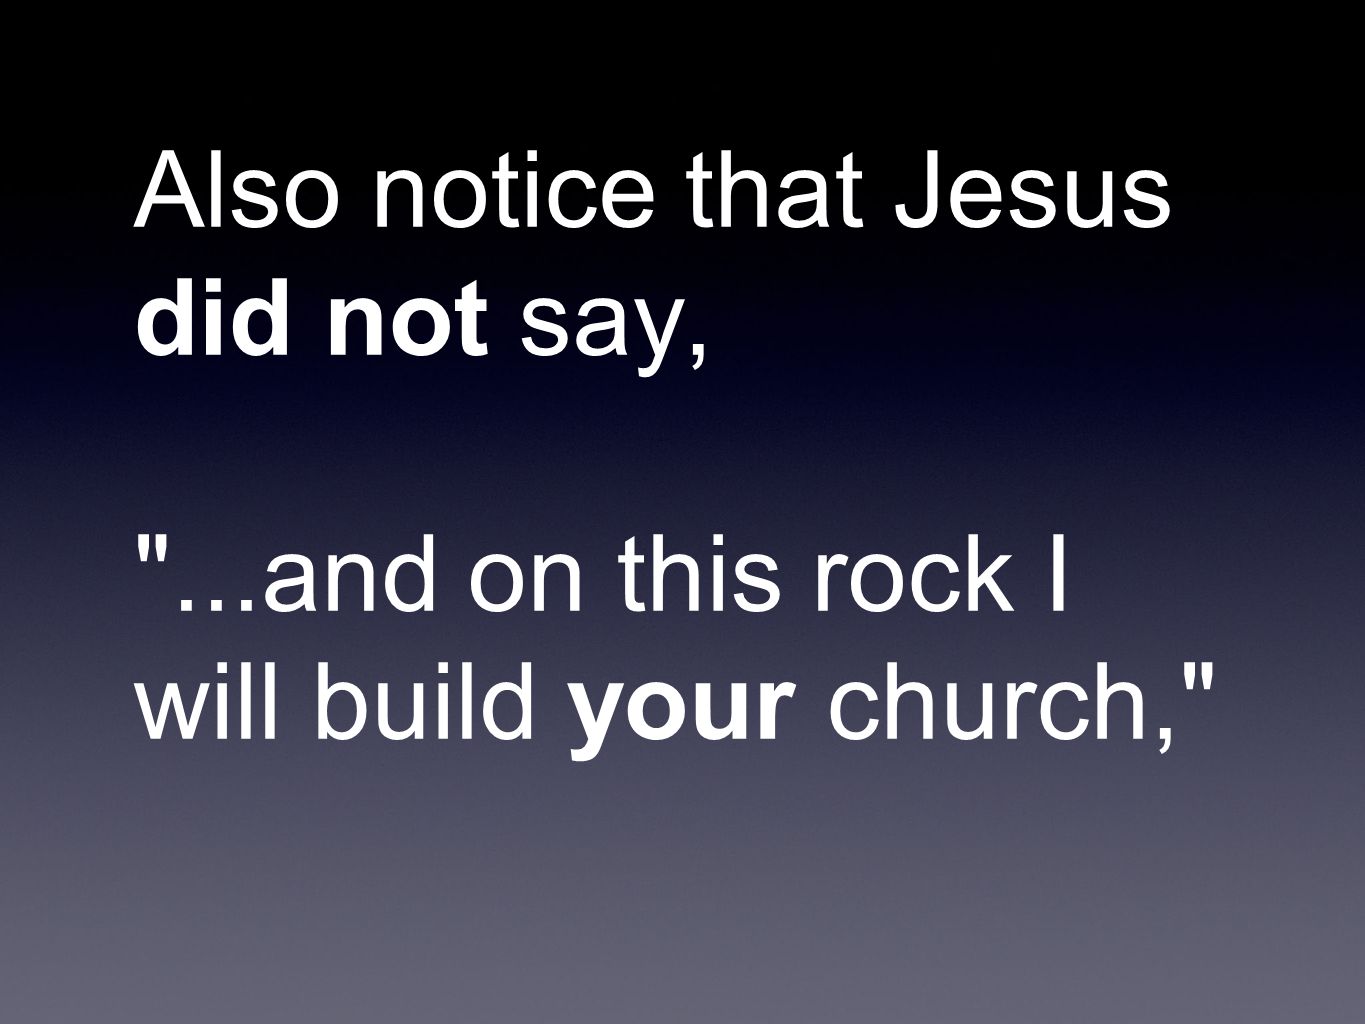 Also notice that Jesus did not say, ...and on this rock I will build your church,